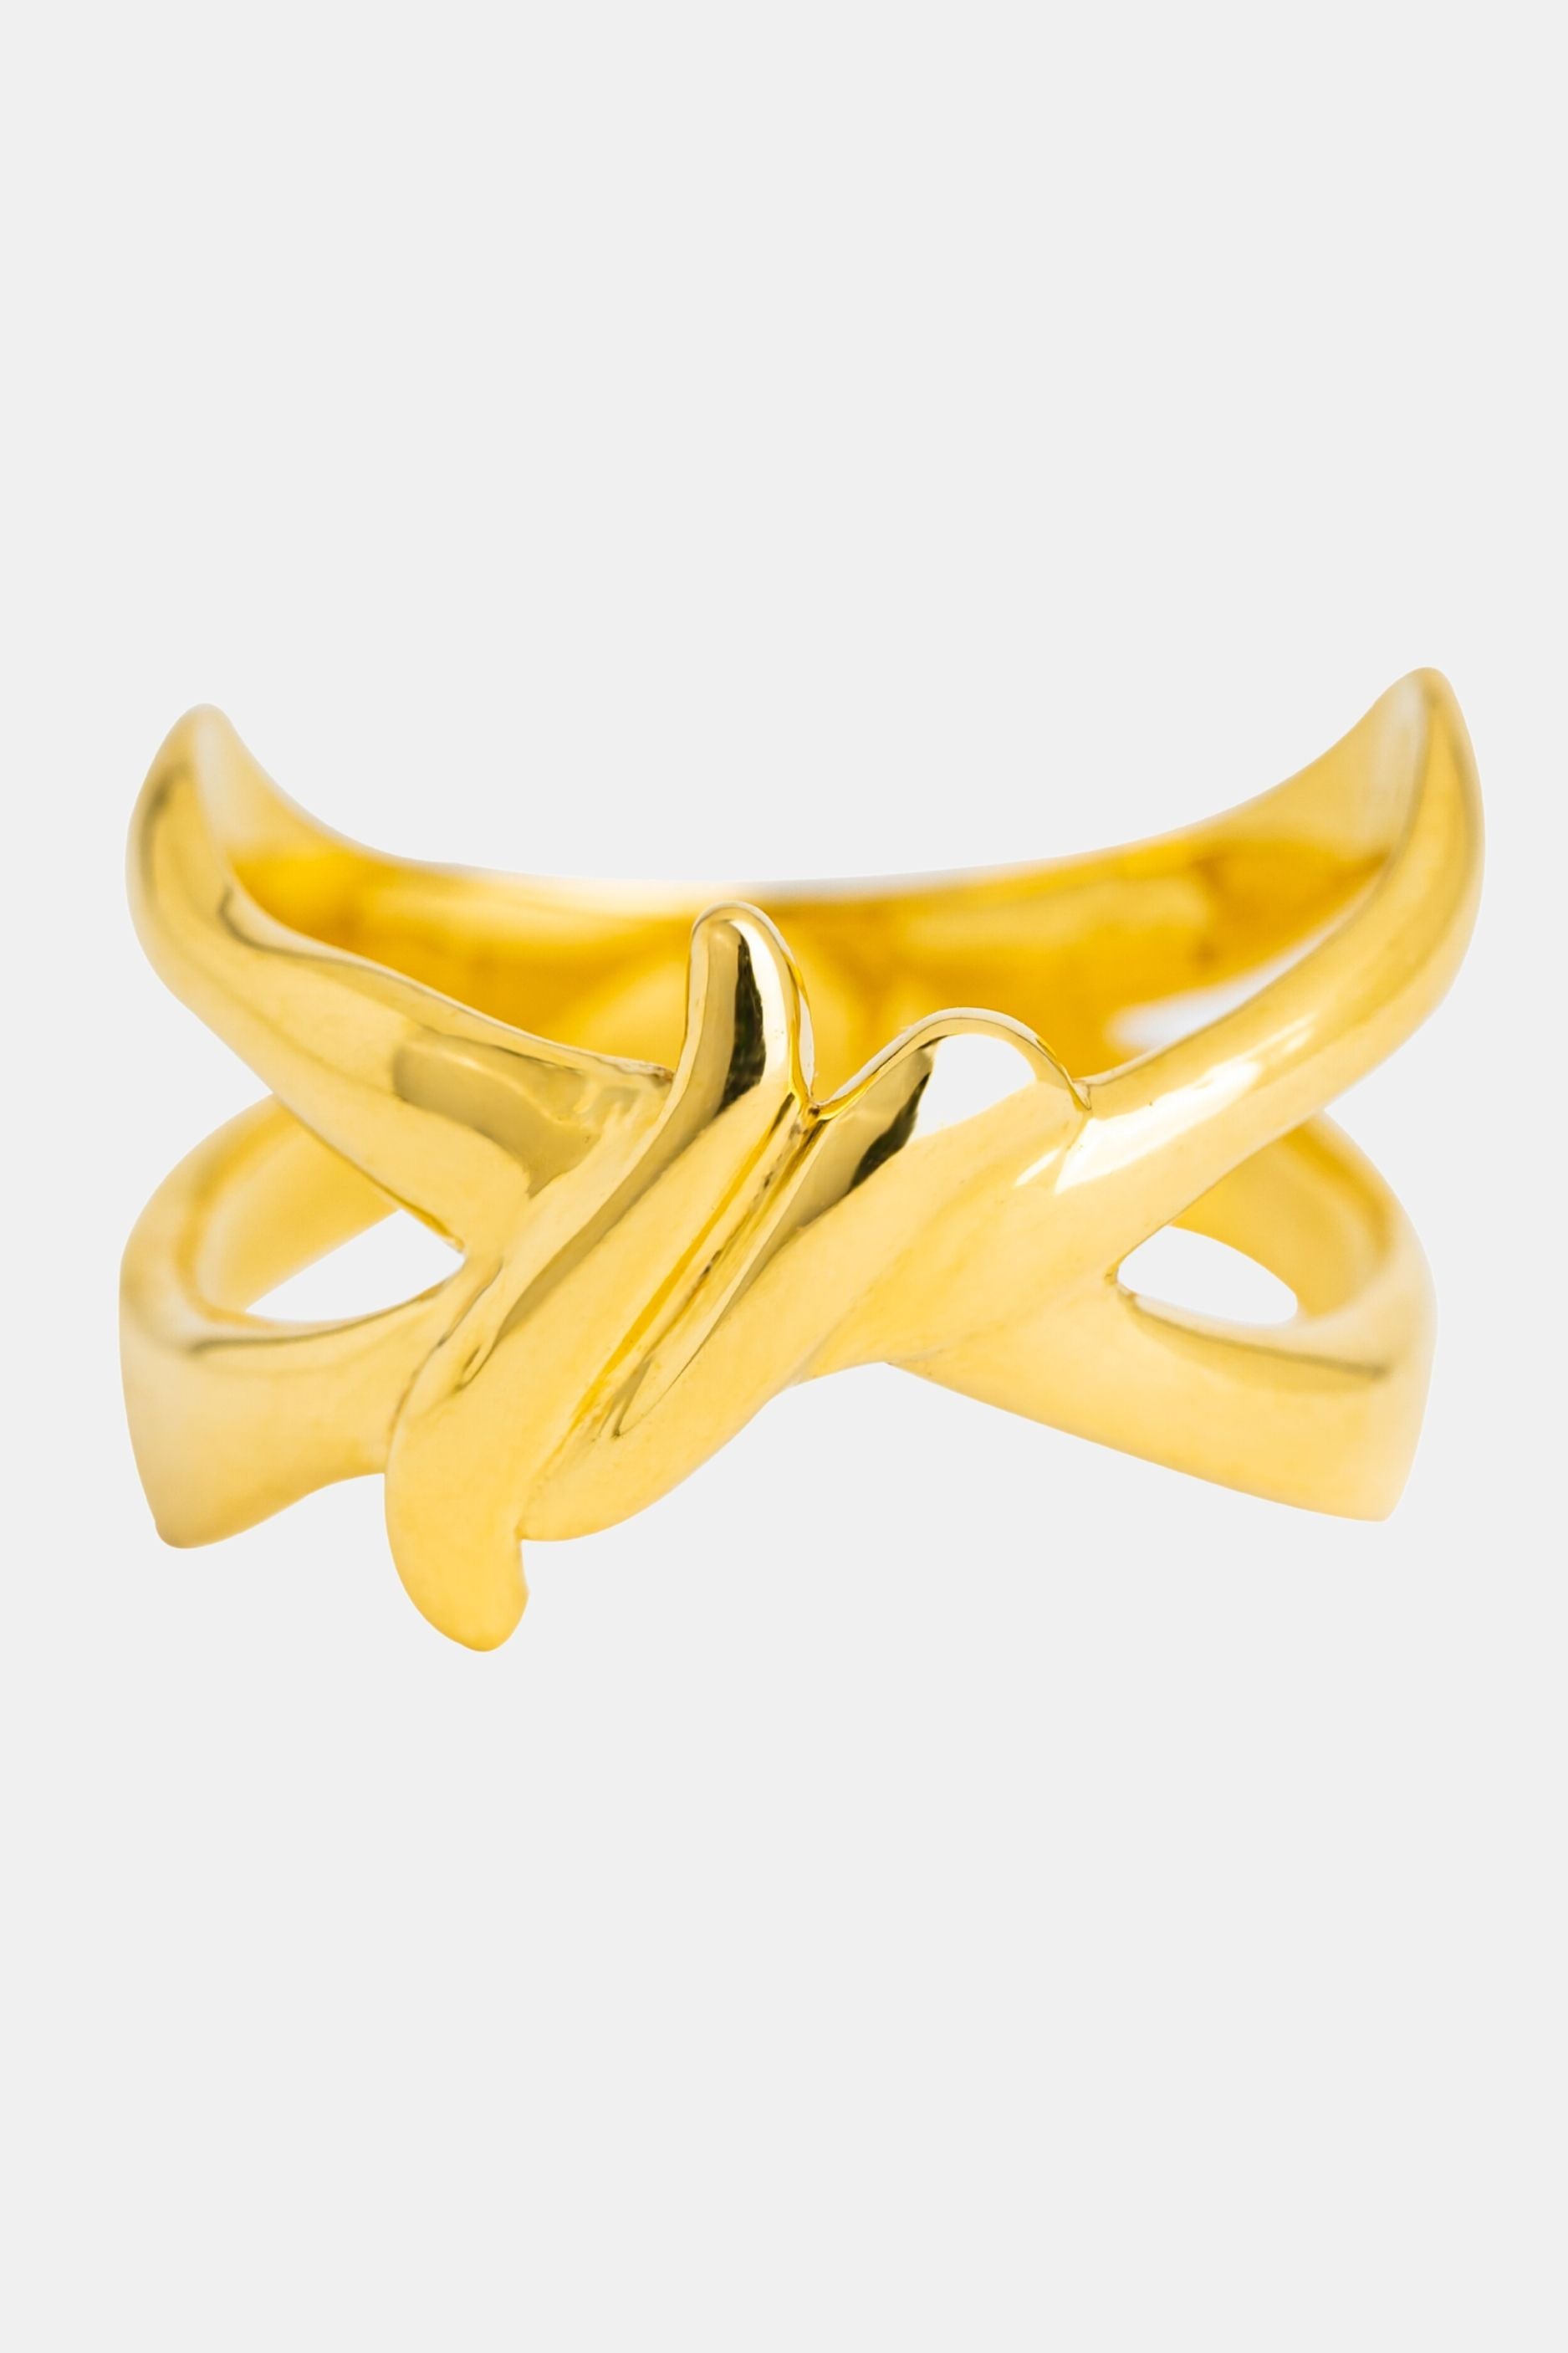 Infinity Crossover 18k gold ring Mamour Paris Jewellery